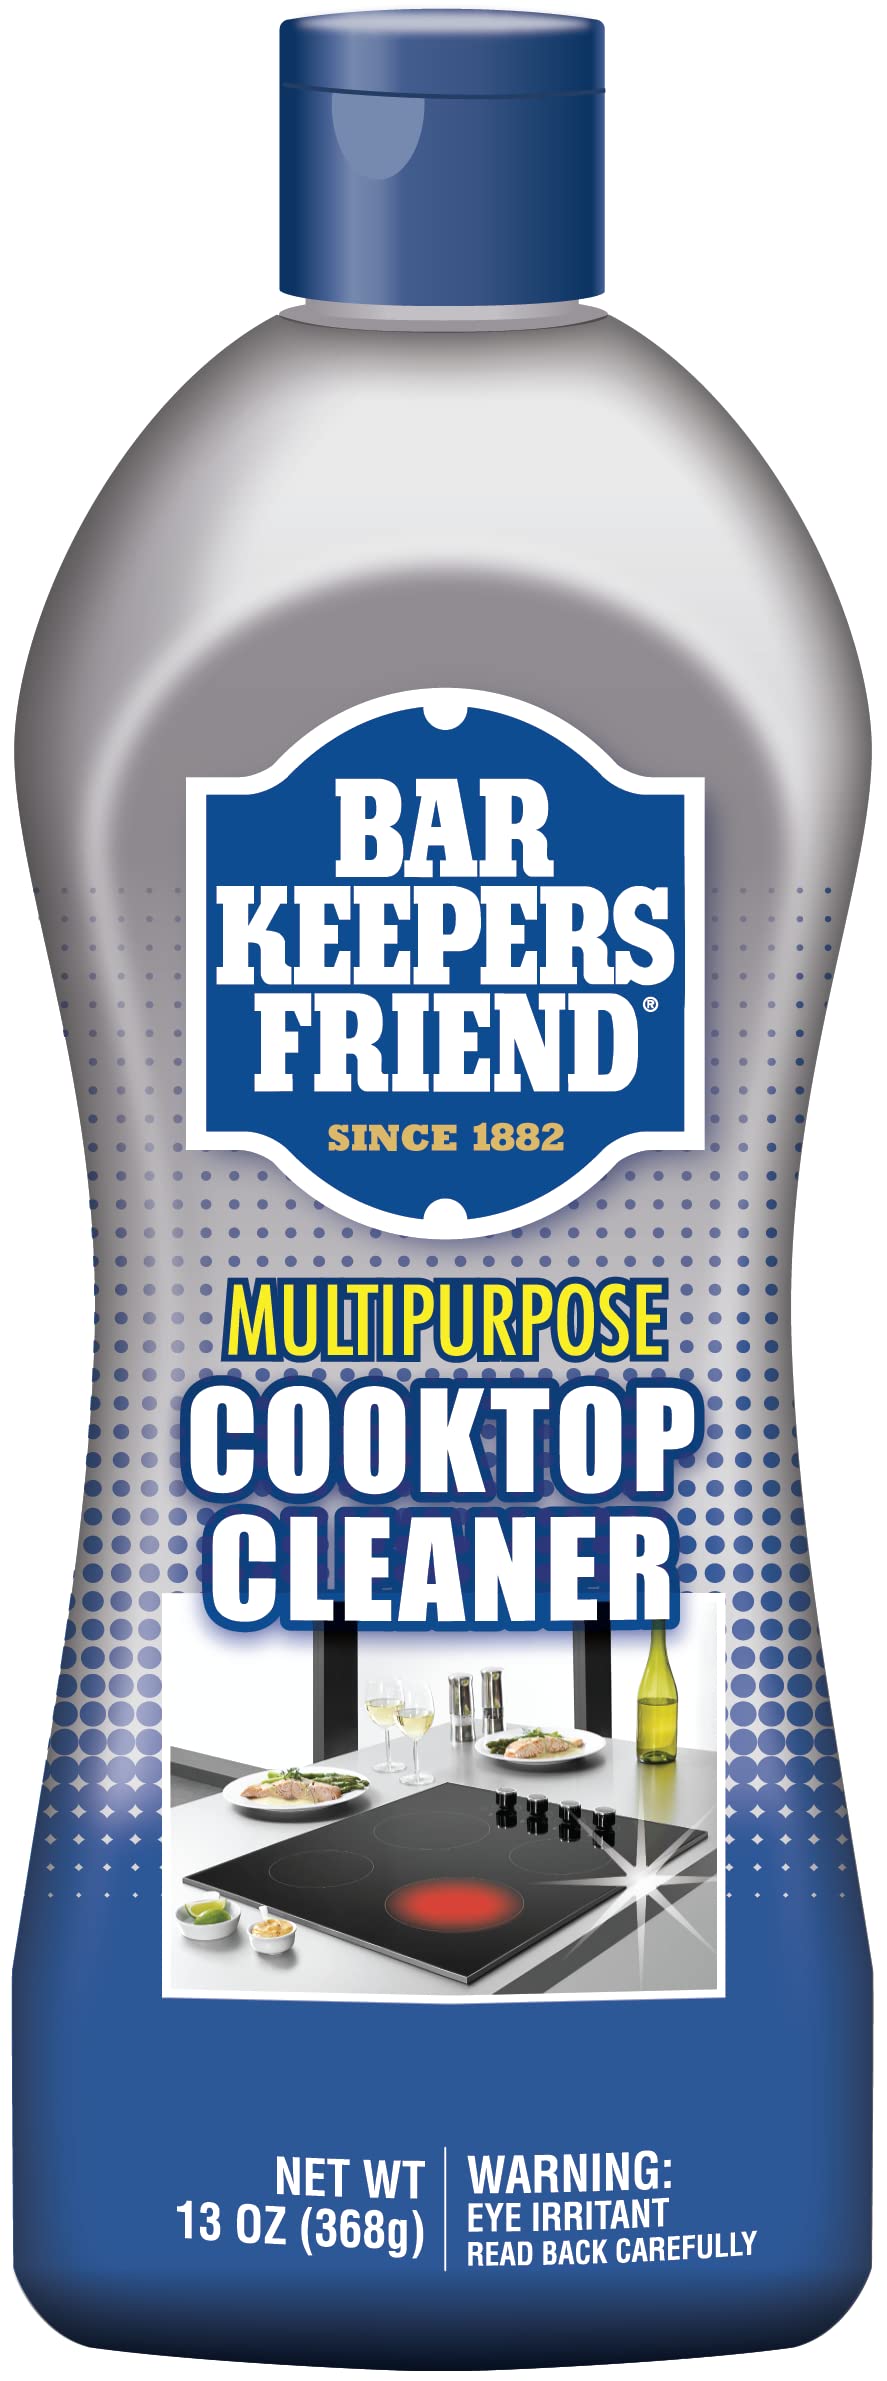 Book Cover BAR KEEPERS FRIEND Multipurpose Cooktop Cleaner (13 oz) - Liquid Stovetop Cleanser - Safe for Use on Glass Ceramic Cooking Surfaces, Copper, Brass, Chrome, and Stainless Steel and Porcelain Sinks']